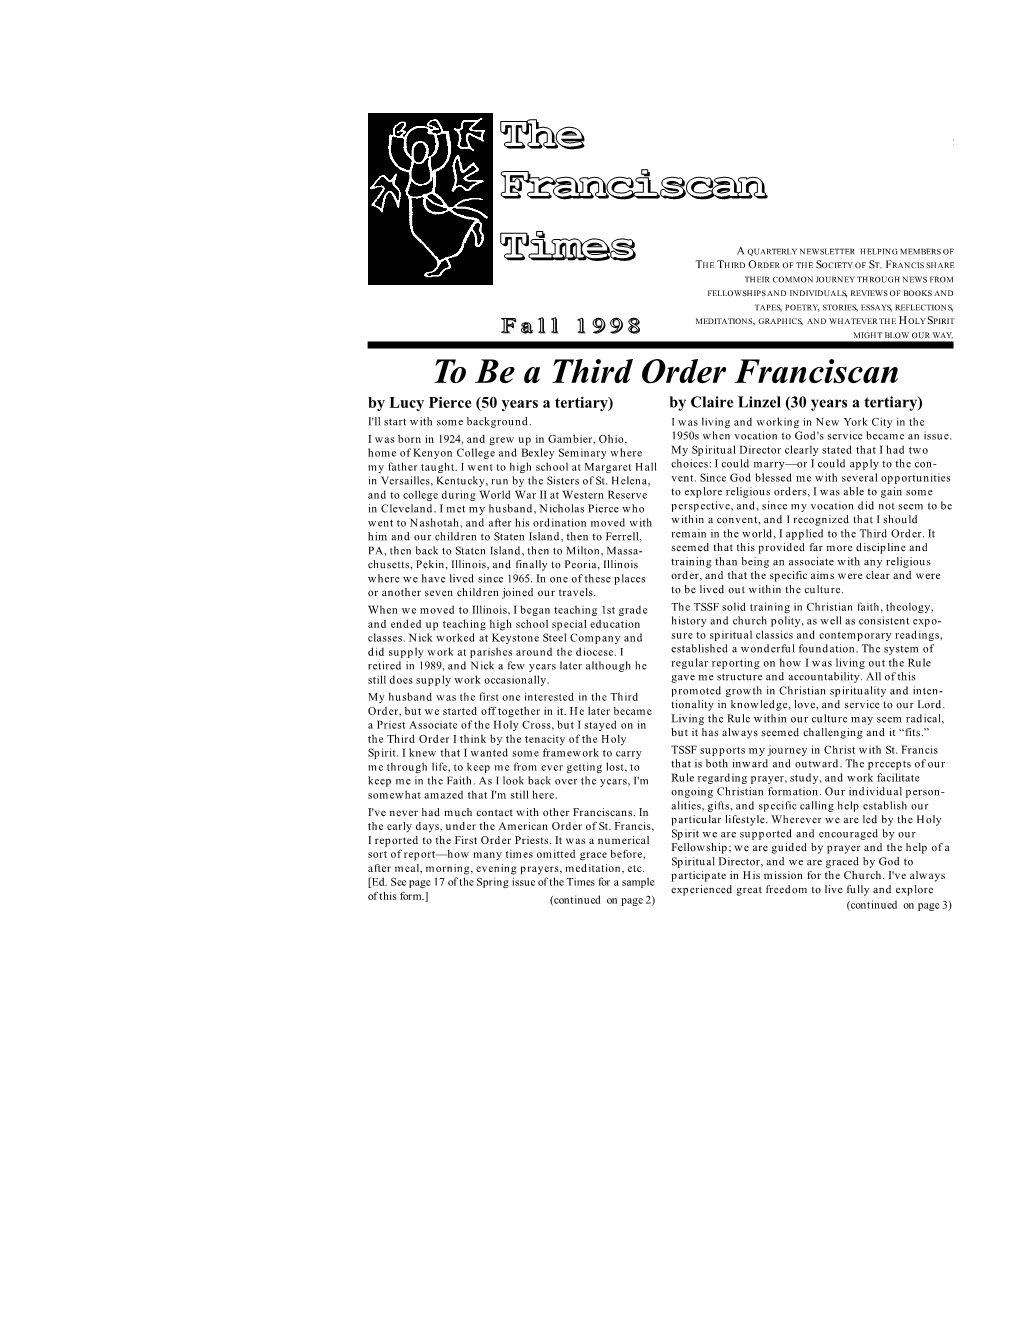 The Franciscan Times Fall 1998 50 Years a Franciscan by Lucy Pierce (Cont.) and the Location of the Provincial the Reply Contained a Penance and Counsel